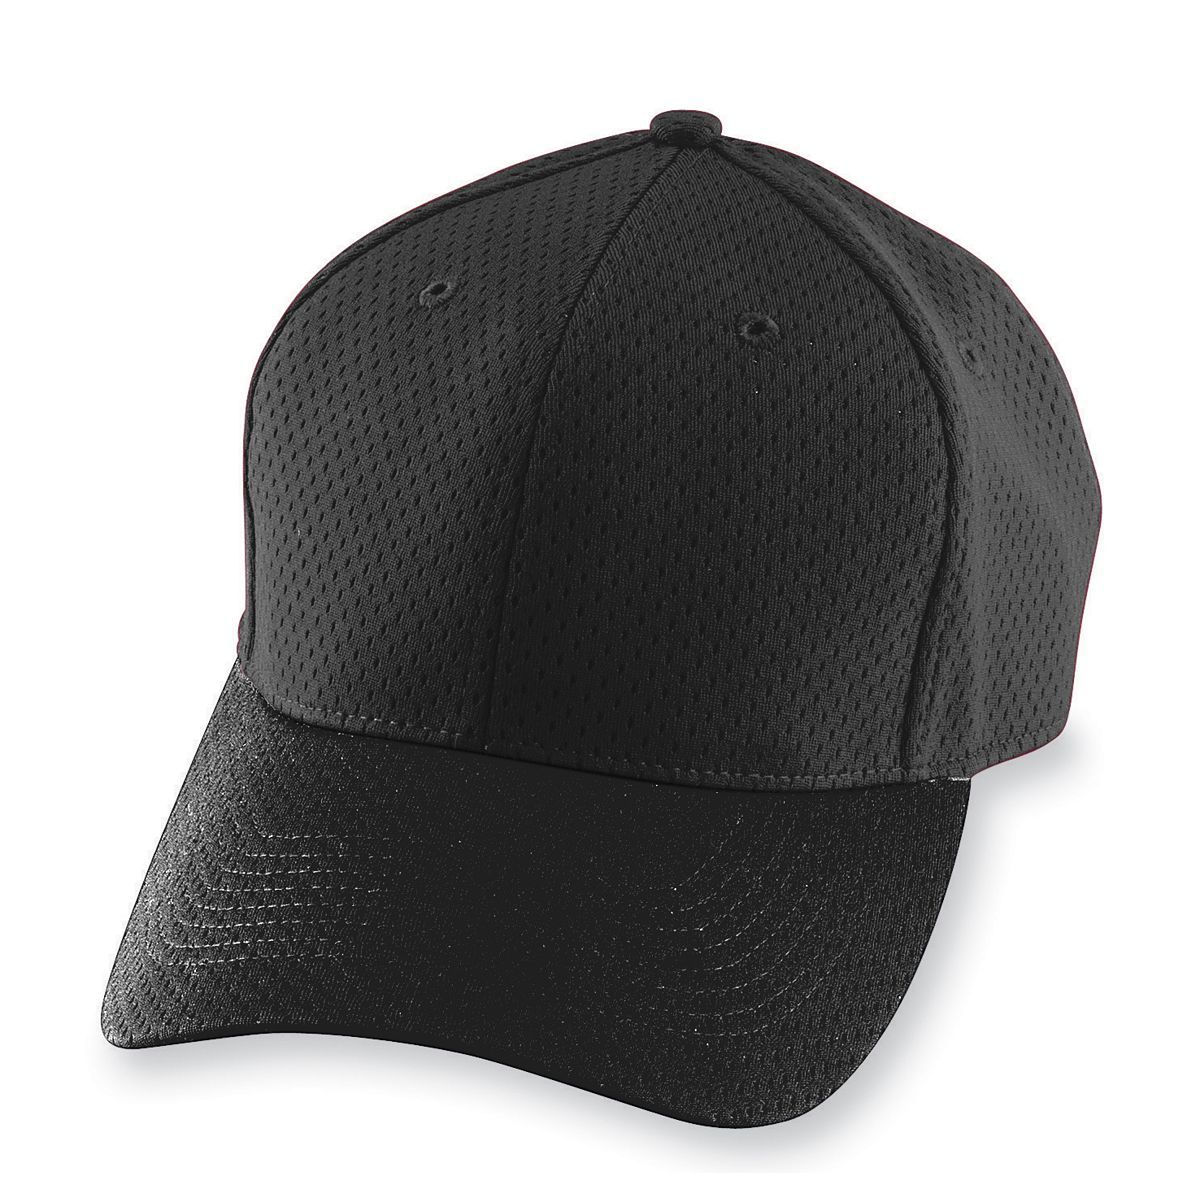 Youth Athletic Mesh Cap 6236